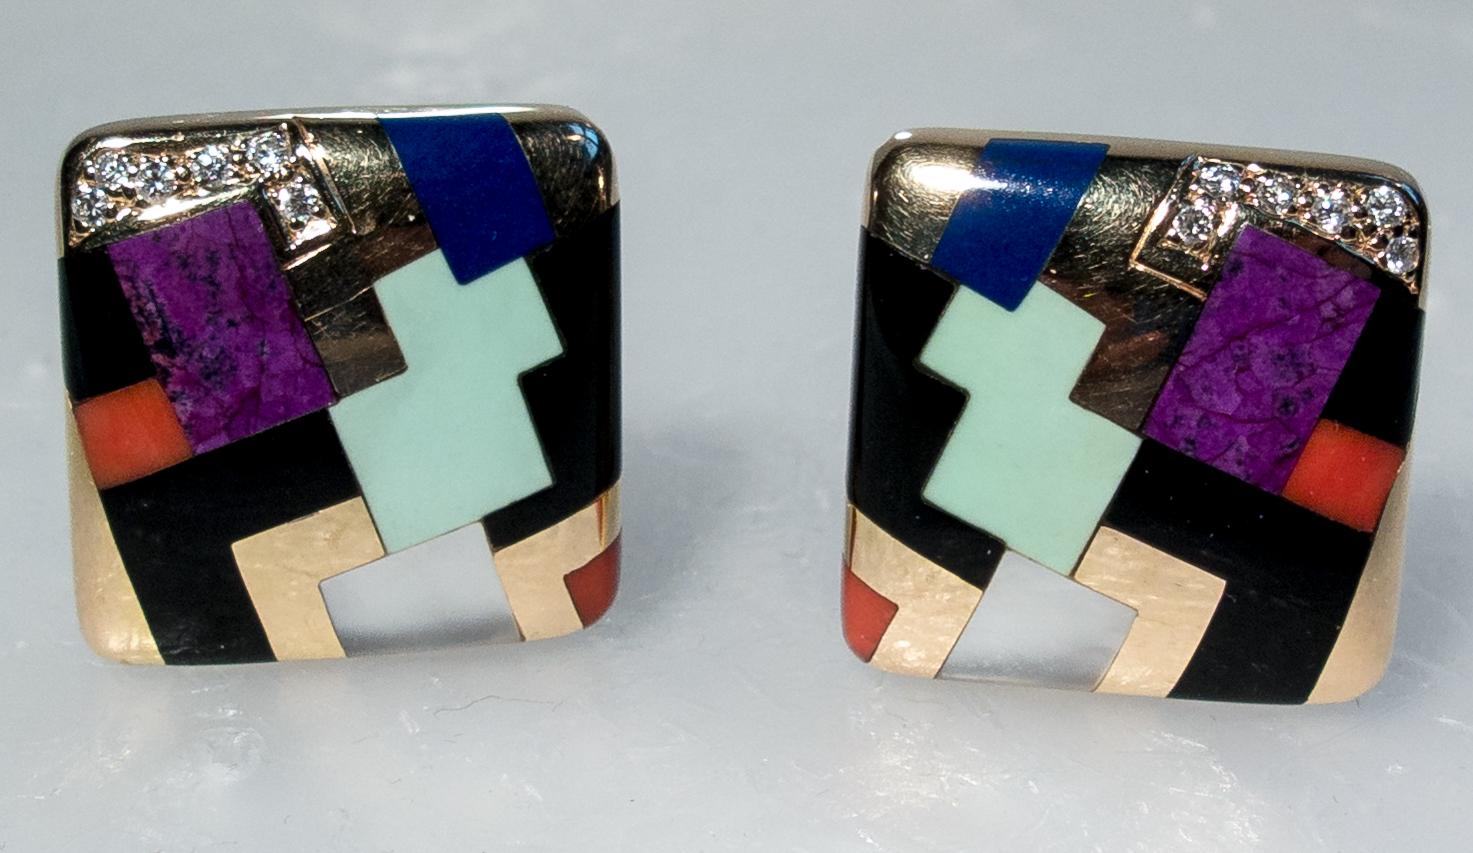 Typical of the colorful inlay work of the American jeweler Asch Grossbardt, these earclips are set with panels of lapis lazuli, onyx, orange coral, green turquoise, purpurine, and a sprinkle of diamonds at the corners.  They measure 14/16